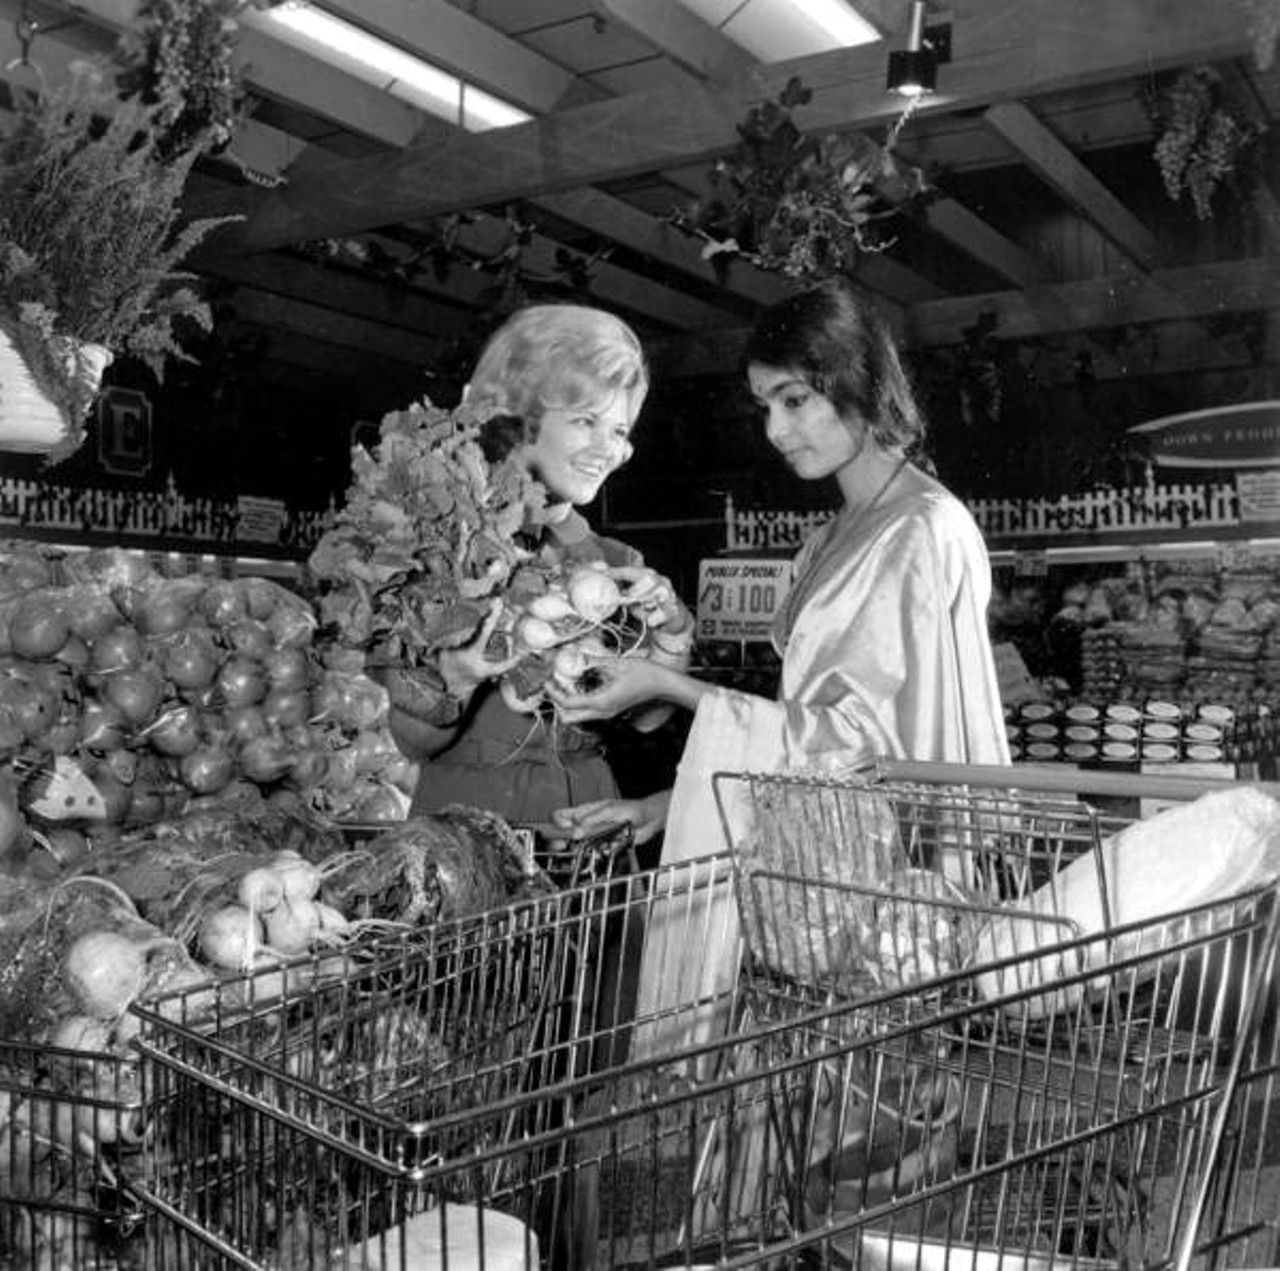 Unidentified women in a Publix grocery store - Tallahassee, Florida, 1971.